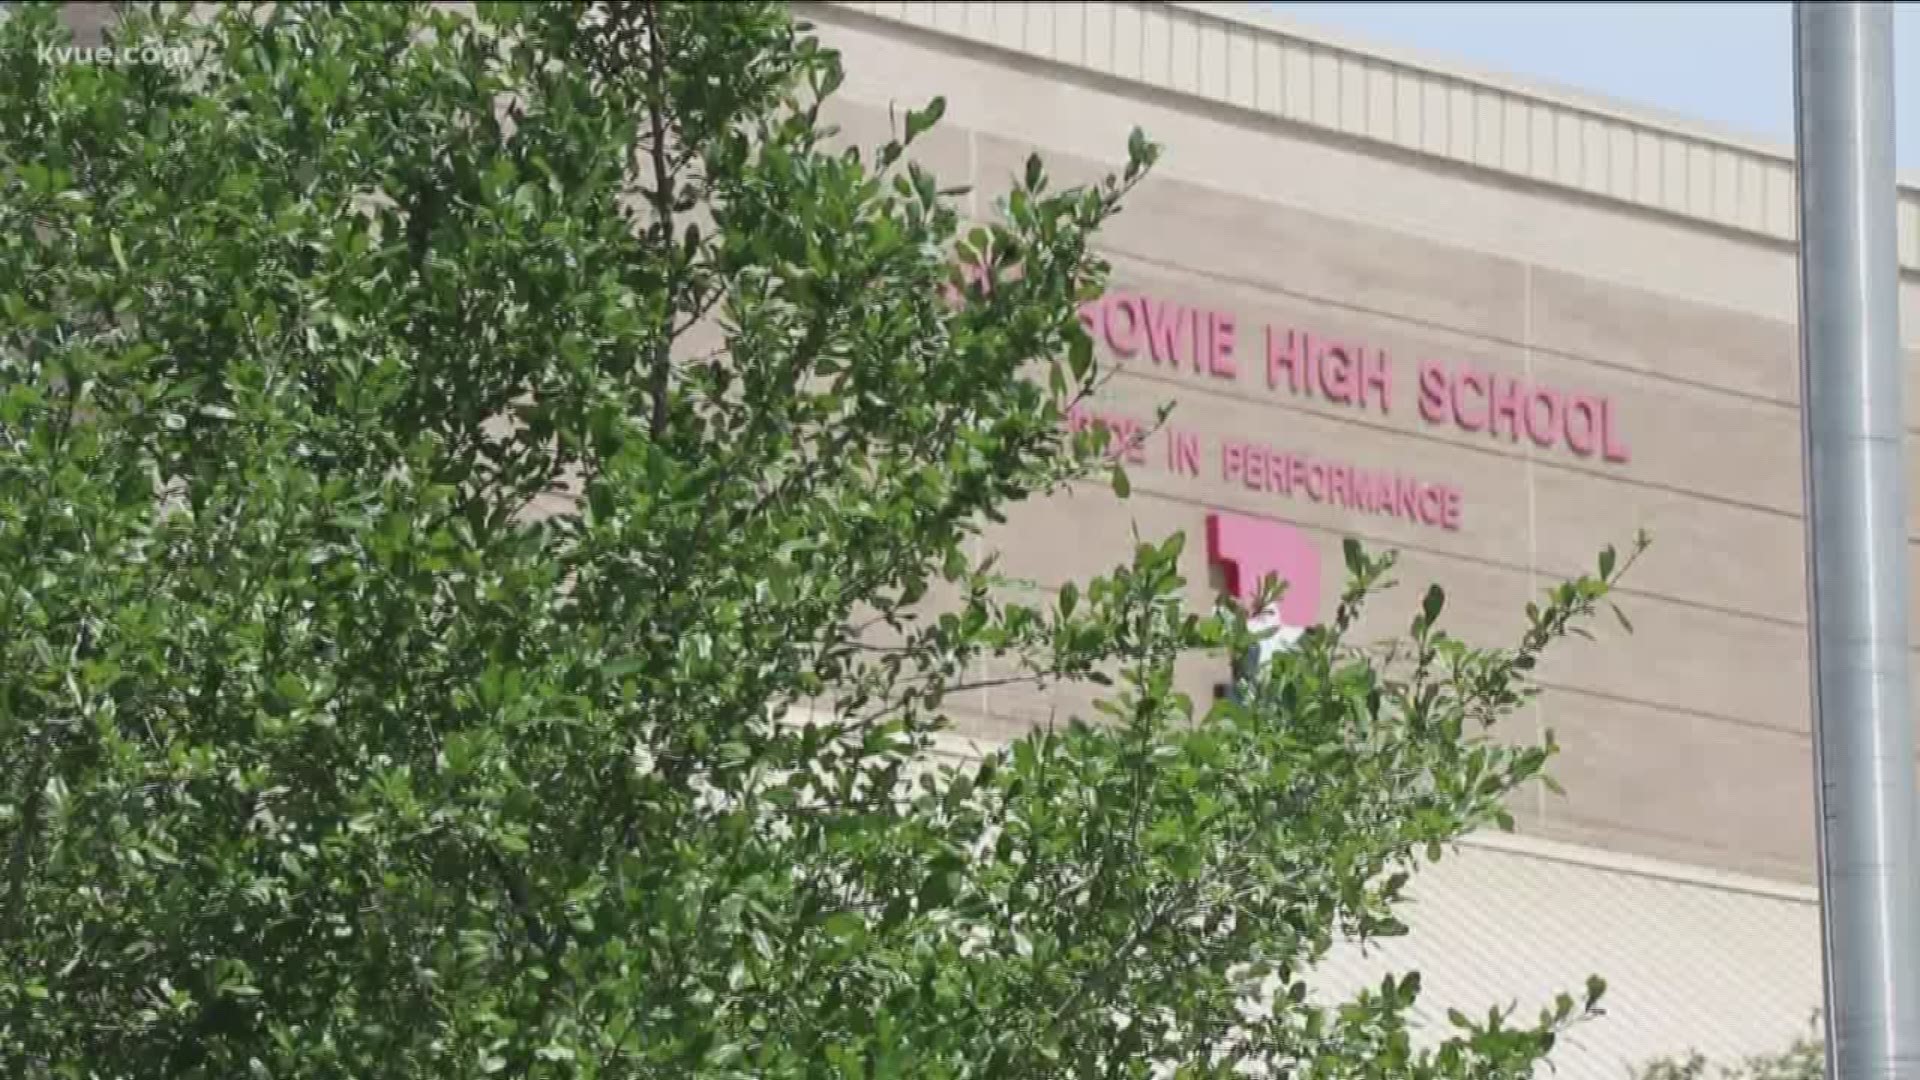 Parents of an African American student at Bowie High School claim their daughter was bullied, retaliated against and discriminated against because of her race.